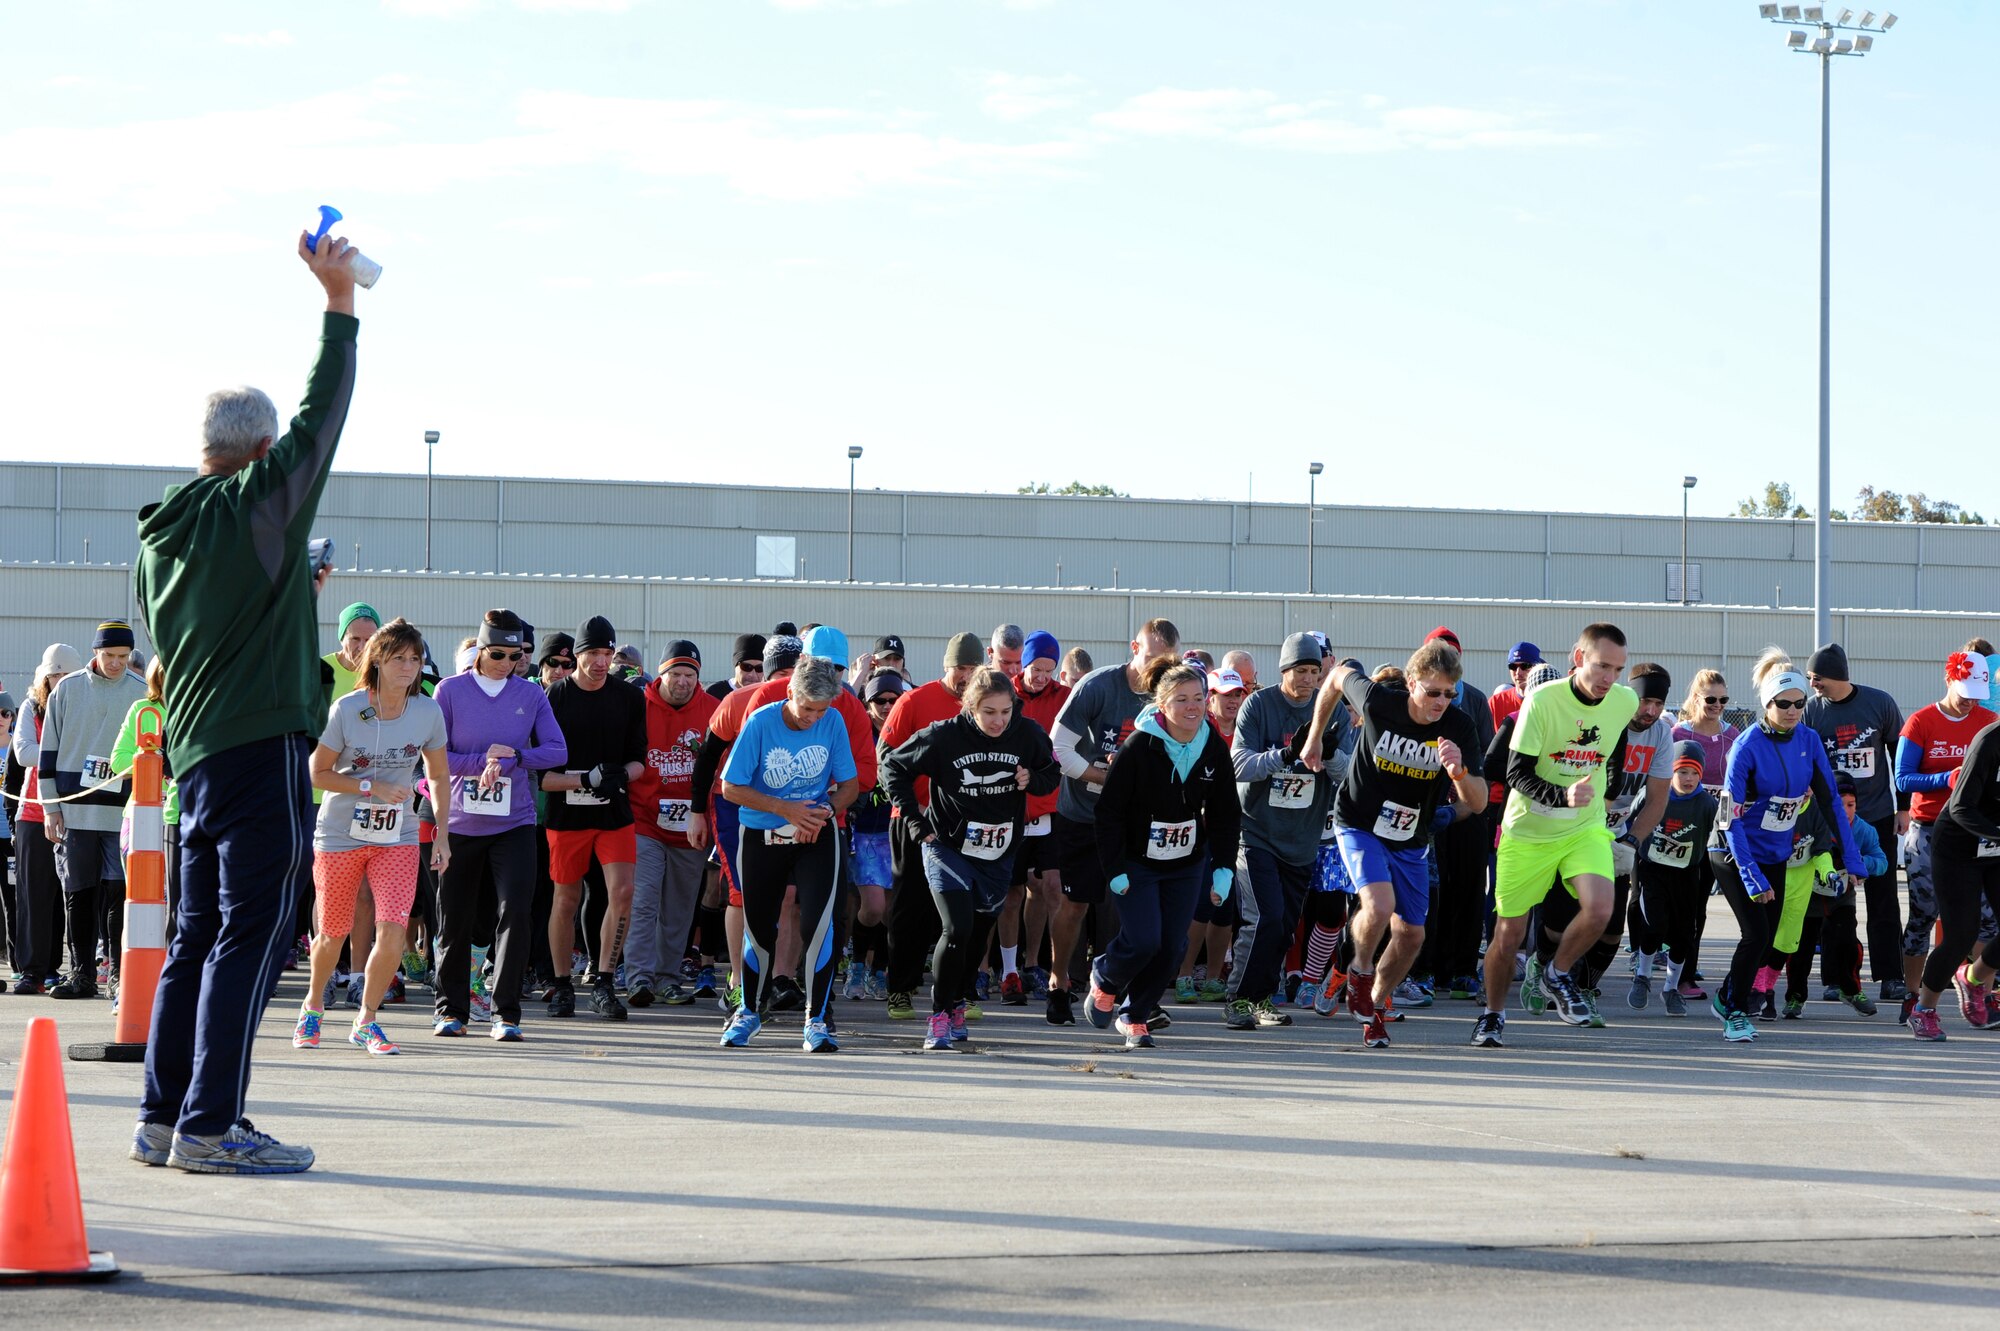 Men and Women of the 180th FW traded combat boots for running shoes, joining local community members in the I Believe I can Fly 5k race, hosted by the Arms Forces Organization, raising awareness about traumatic brain injuries Oct. 18, 2015. The Arms Forces provides education and programs allowing veterans past and present, who have a traumatic brain injury or post-traumatic stress disorder to find understanding, purpose and direction as they face the other war while living at home with their invisible injury. Air National Guard Photo by Staff Sgt. John Wilkes/Released.